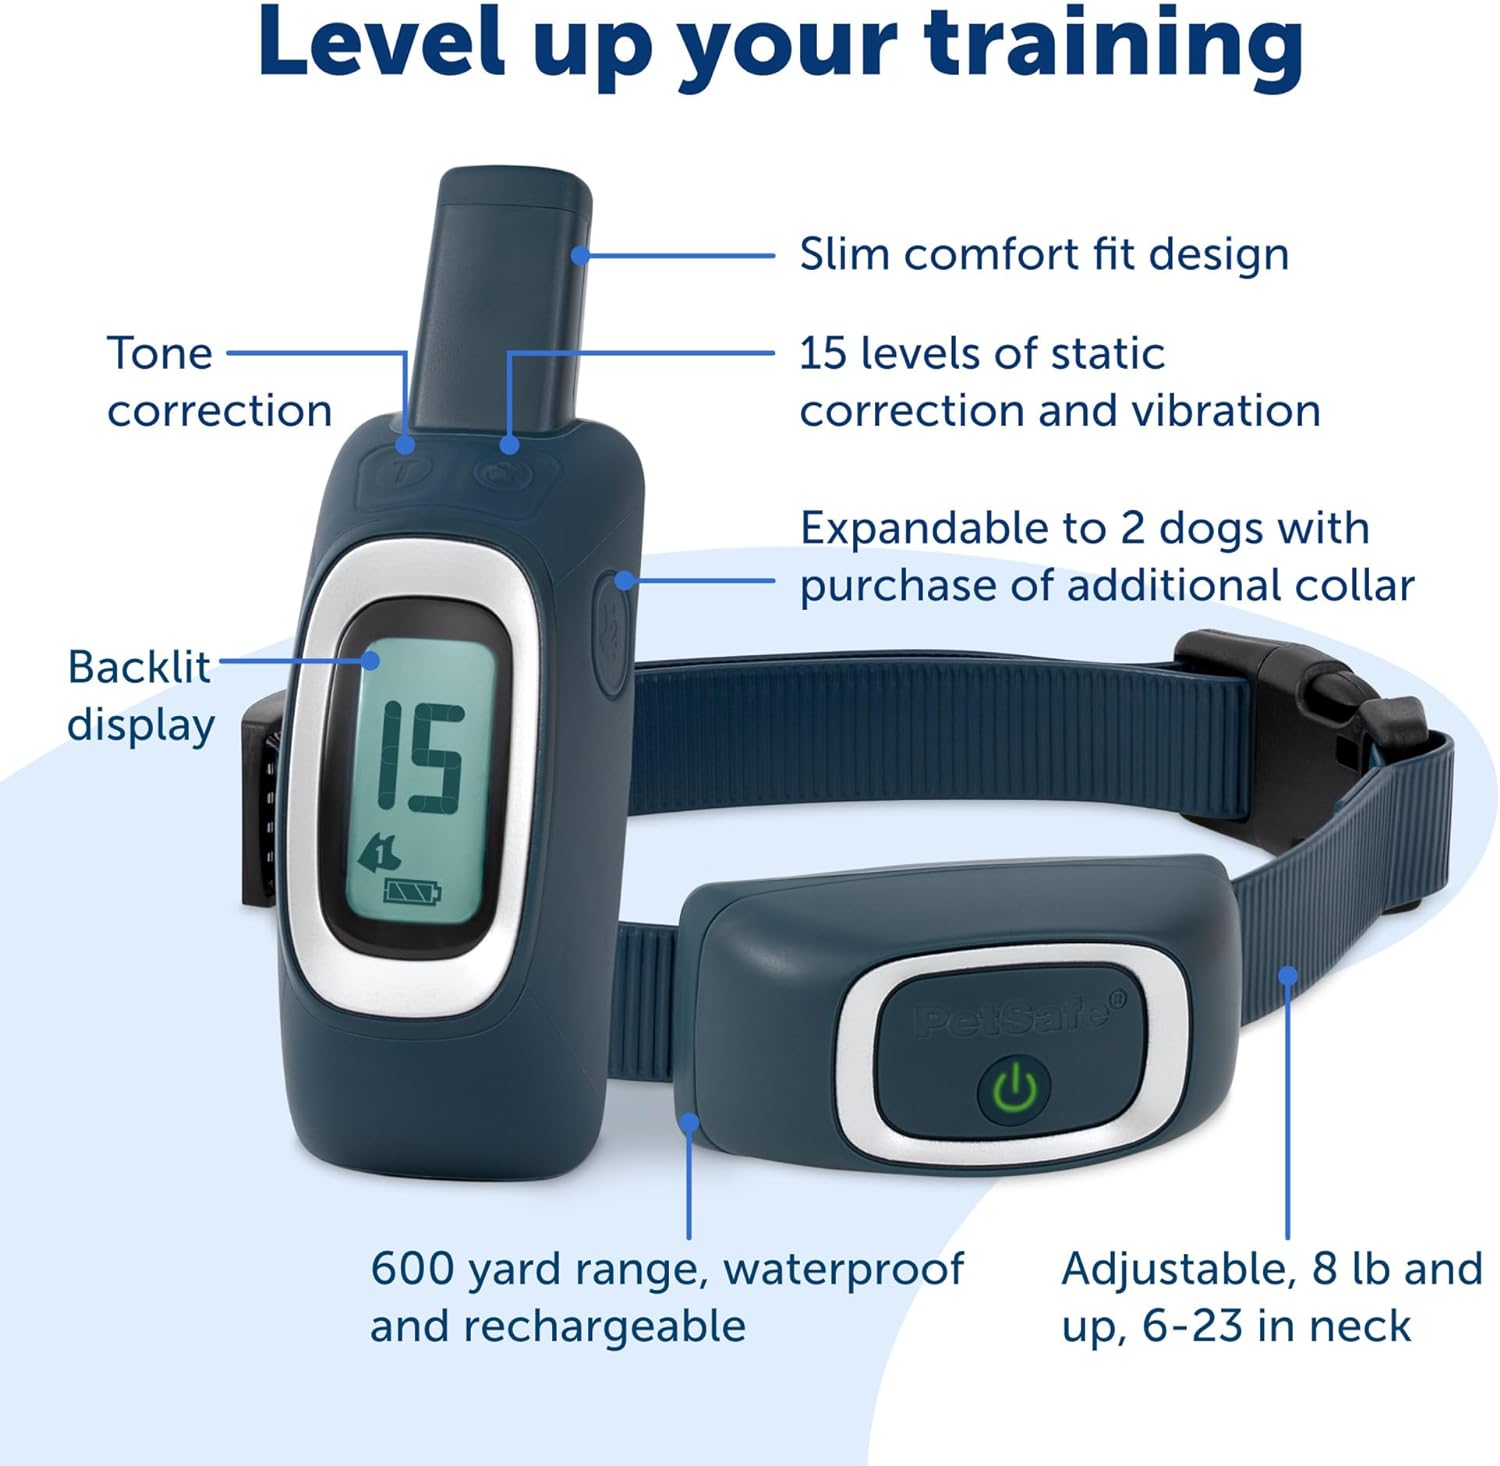 PetSafe Remote Training Collar - 300 Yard (900 FT) Range - Collar Fits Medium or Large Dogs - Choose from Tone, Vibration, or 15 Levels of Static Stimulation for Training Off Leash Dogs